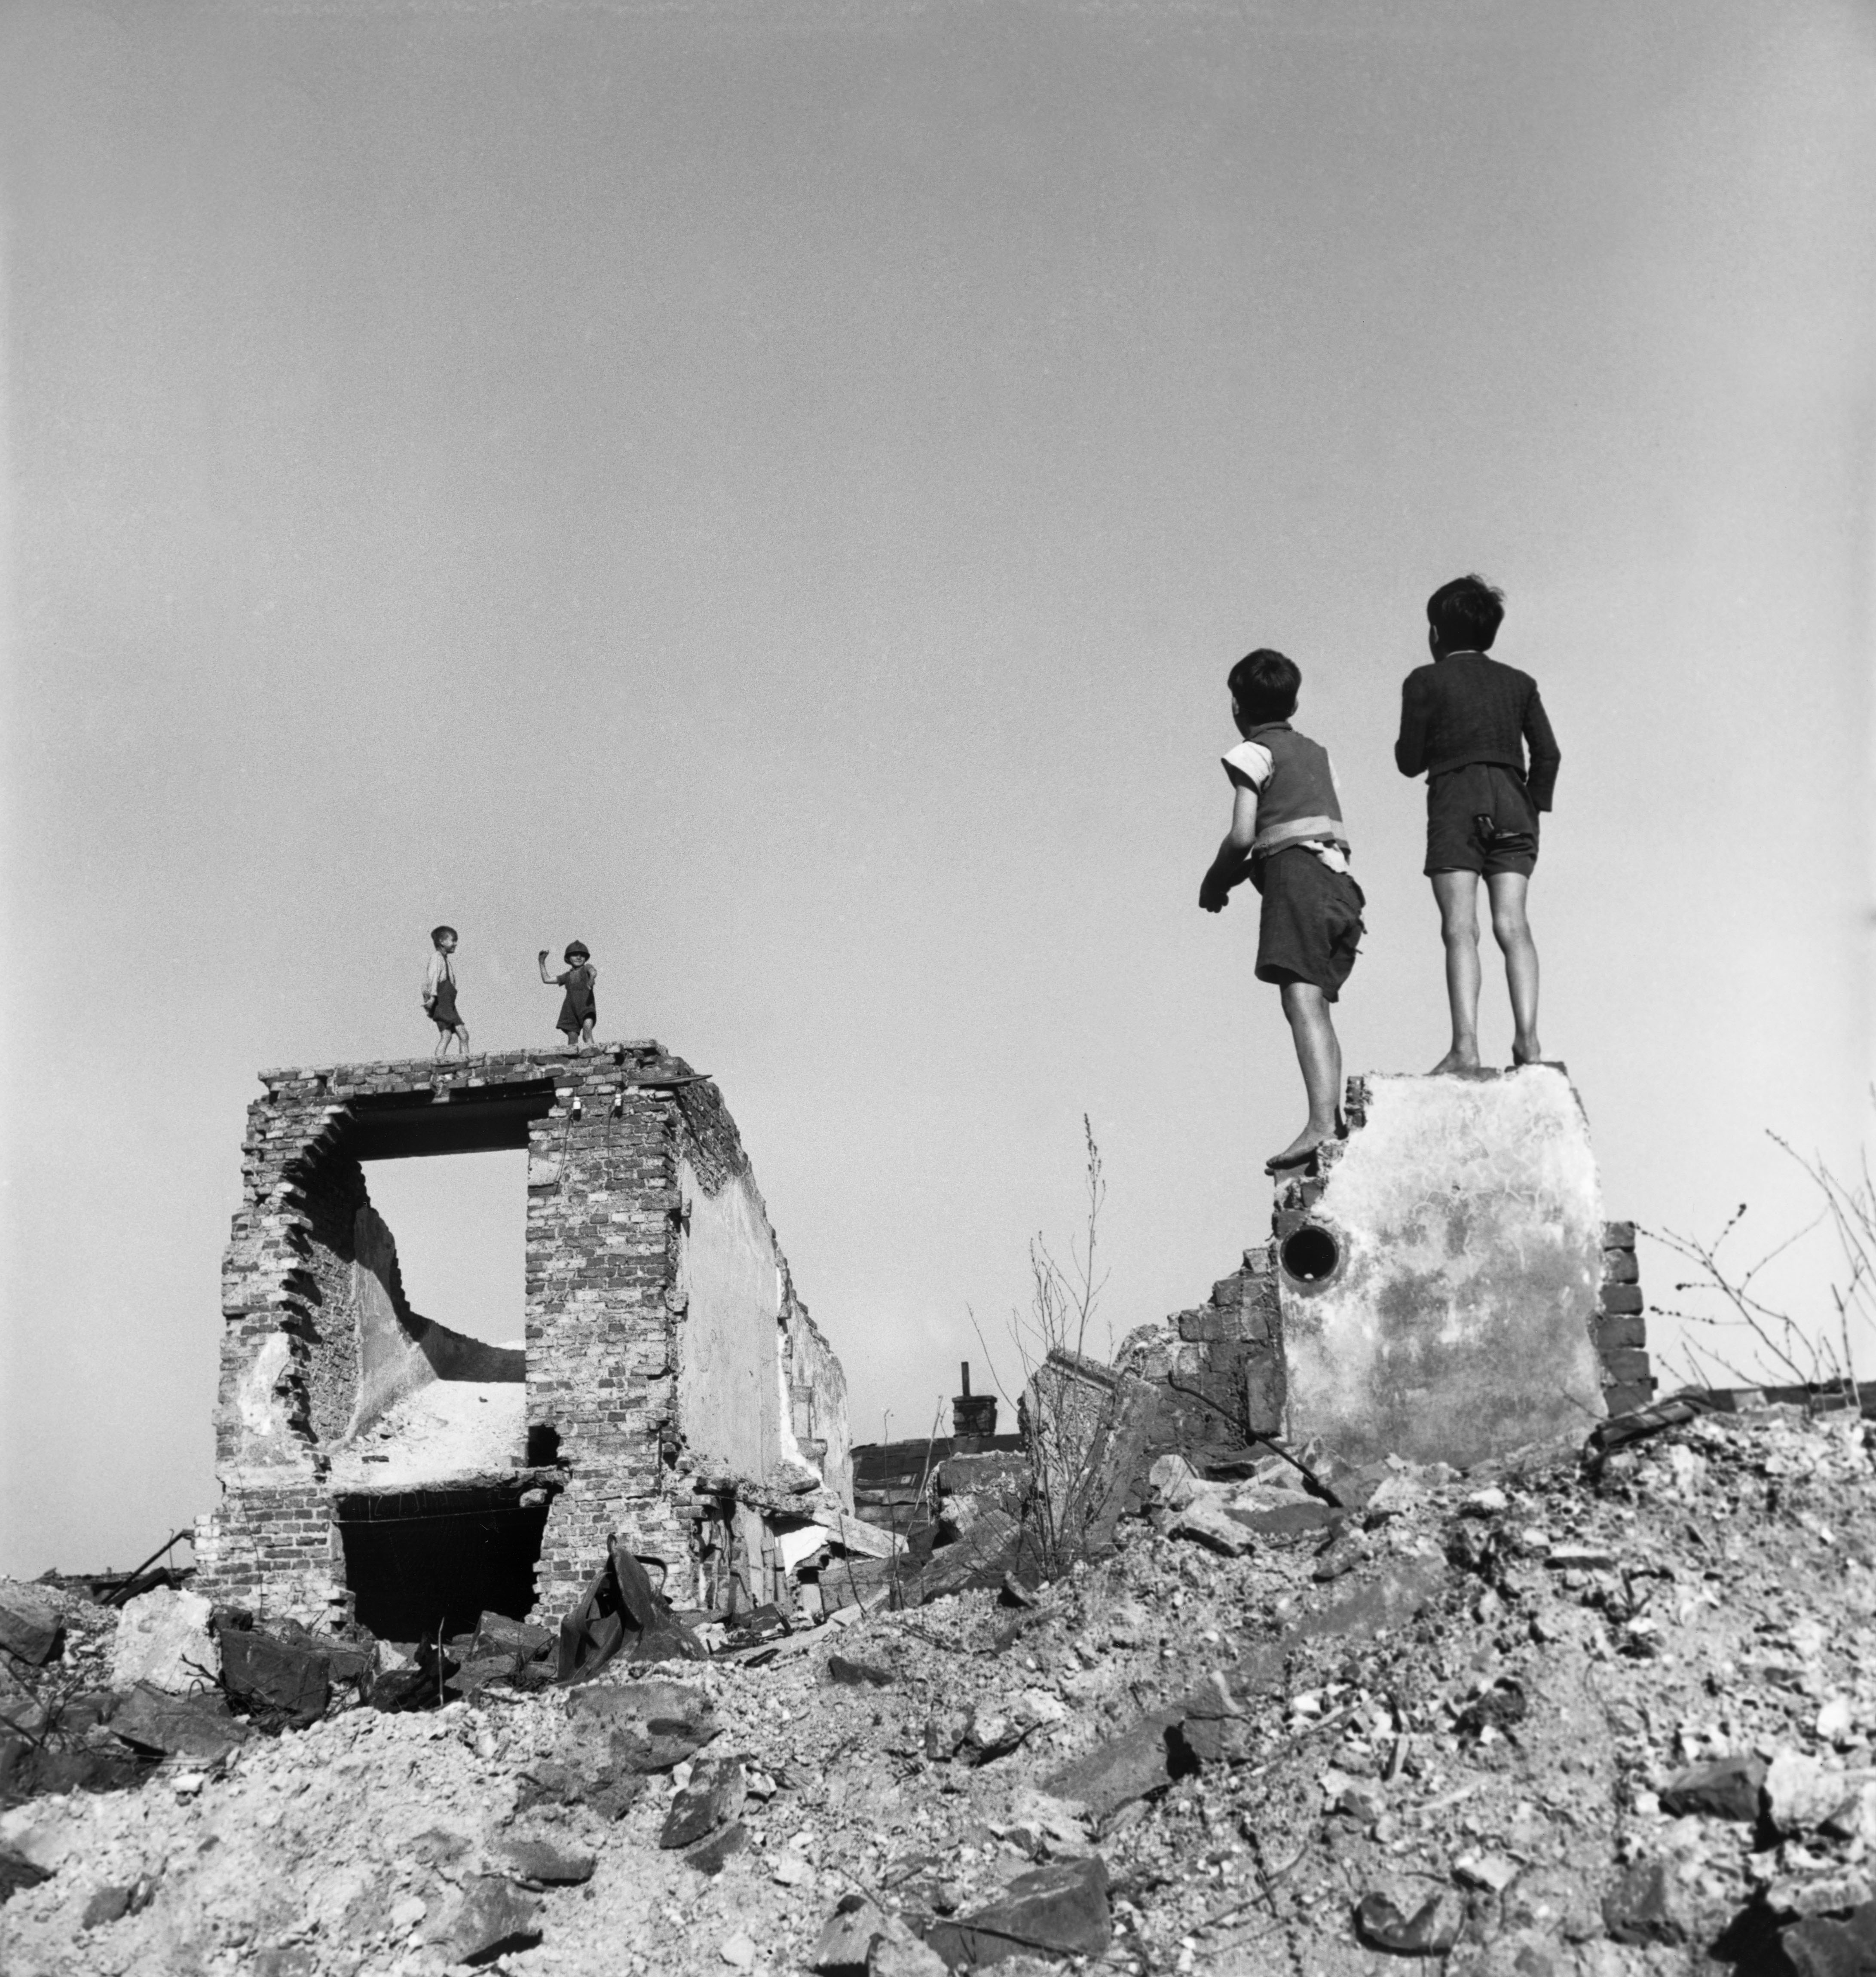 David Seymour - Boys play in bombed-out buildings. Vienna, Austria. 1948